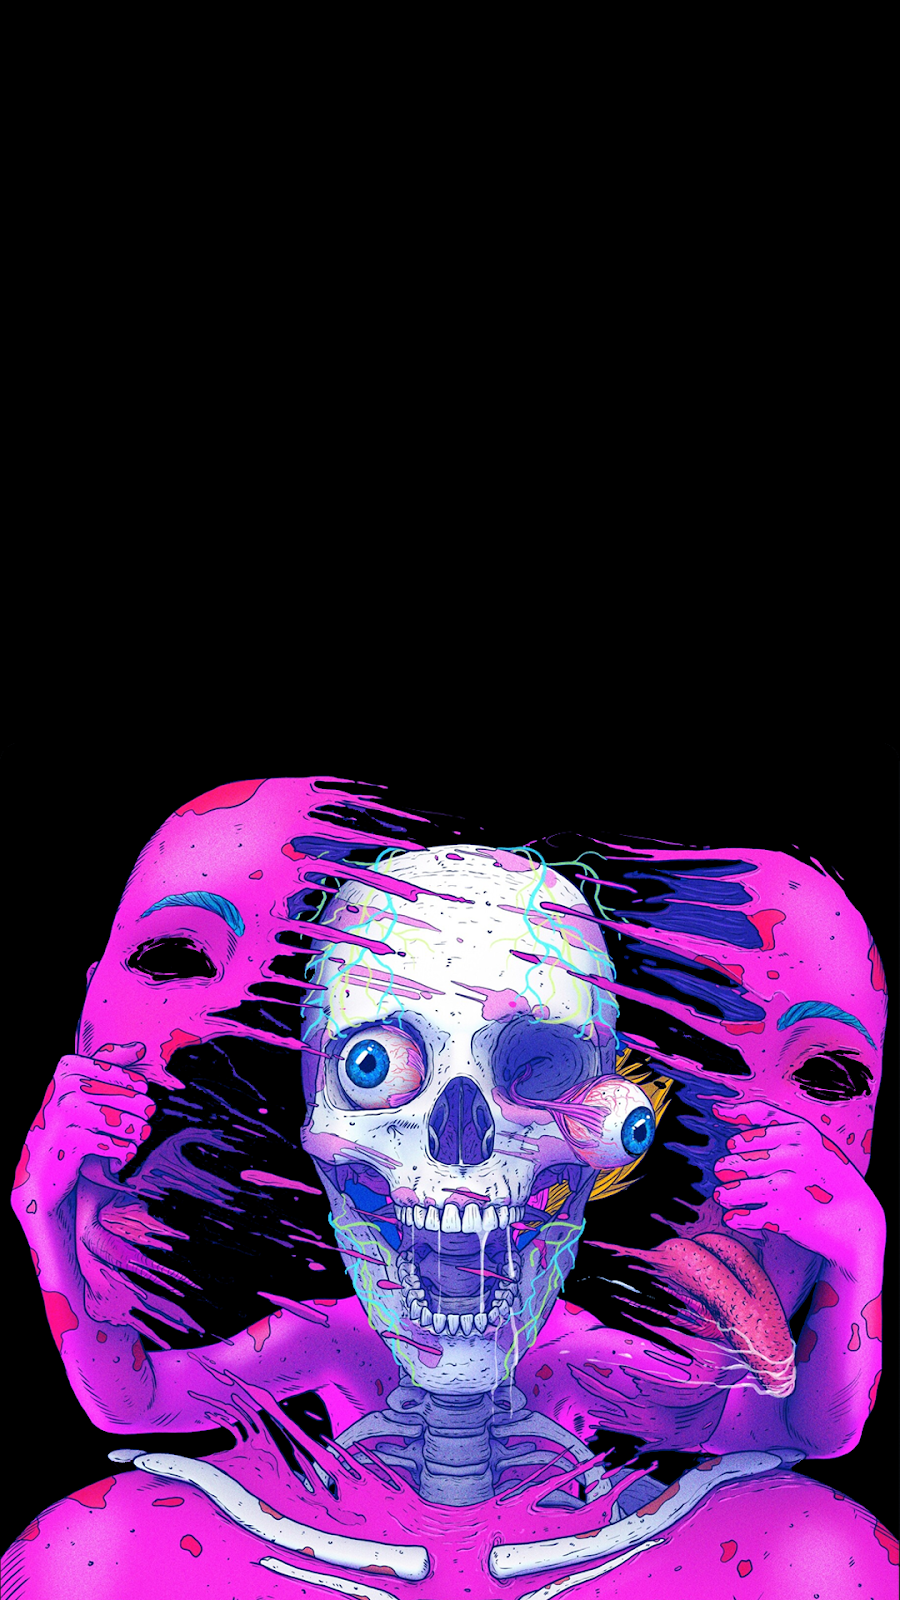 AMOLED PHONE WALLPAPER COLLECTION 122. Cool Wallpaper.cc. Psychedelic art, Psychedelic drawings, Psychadelic art